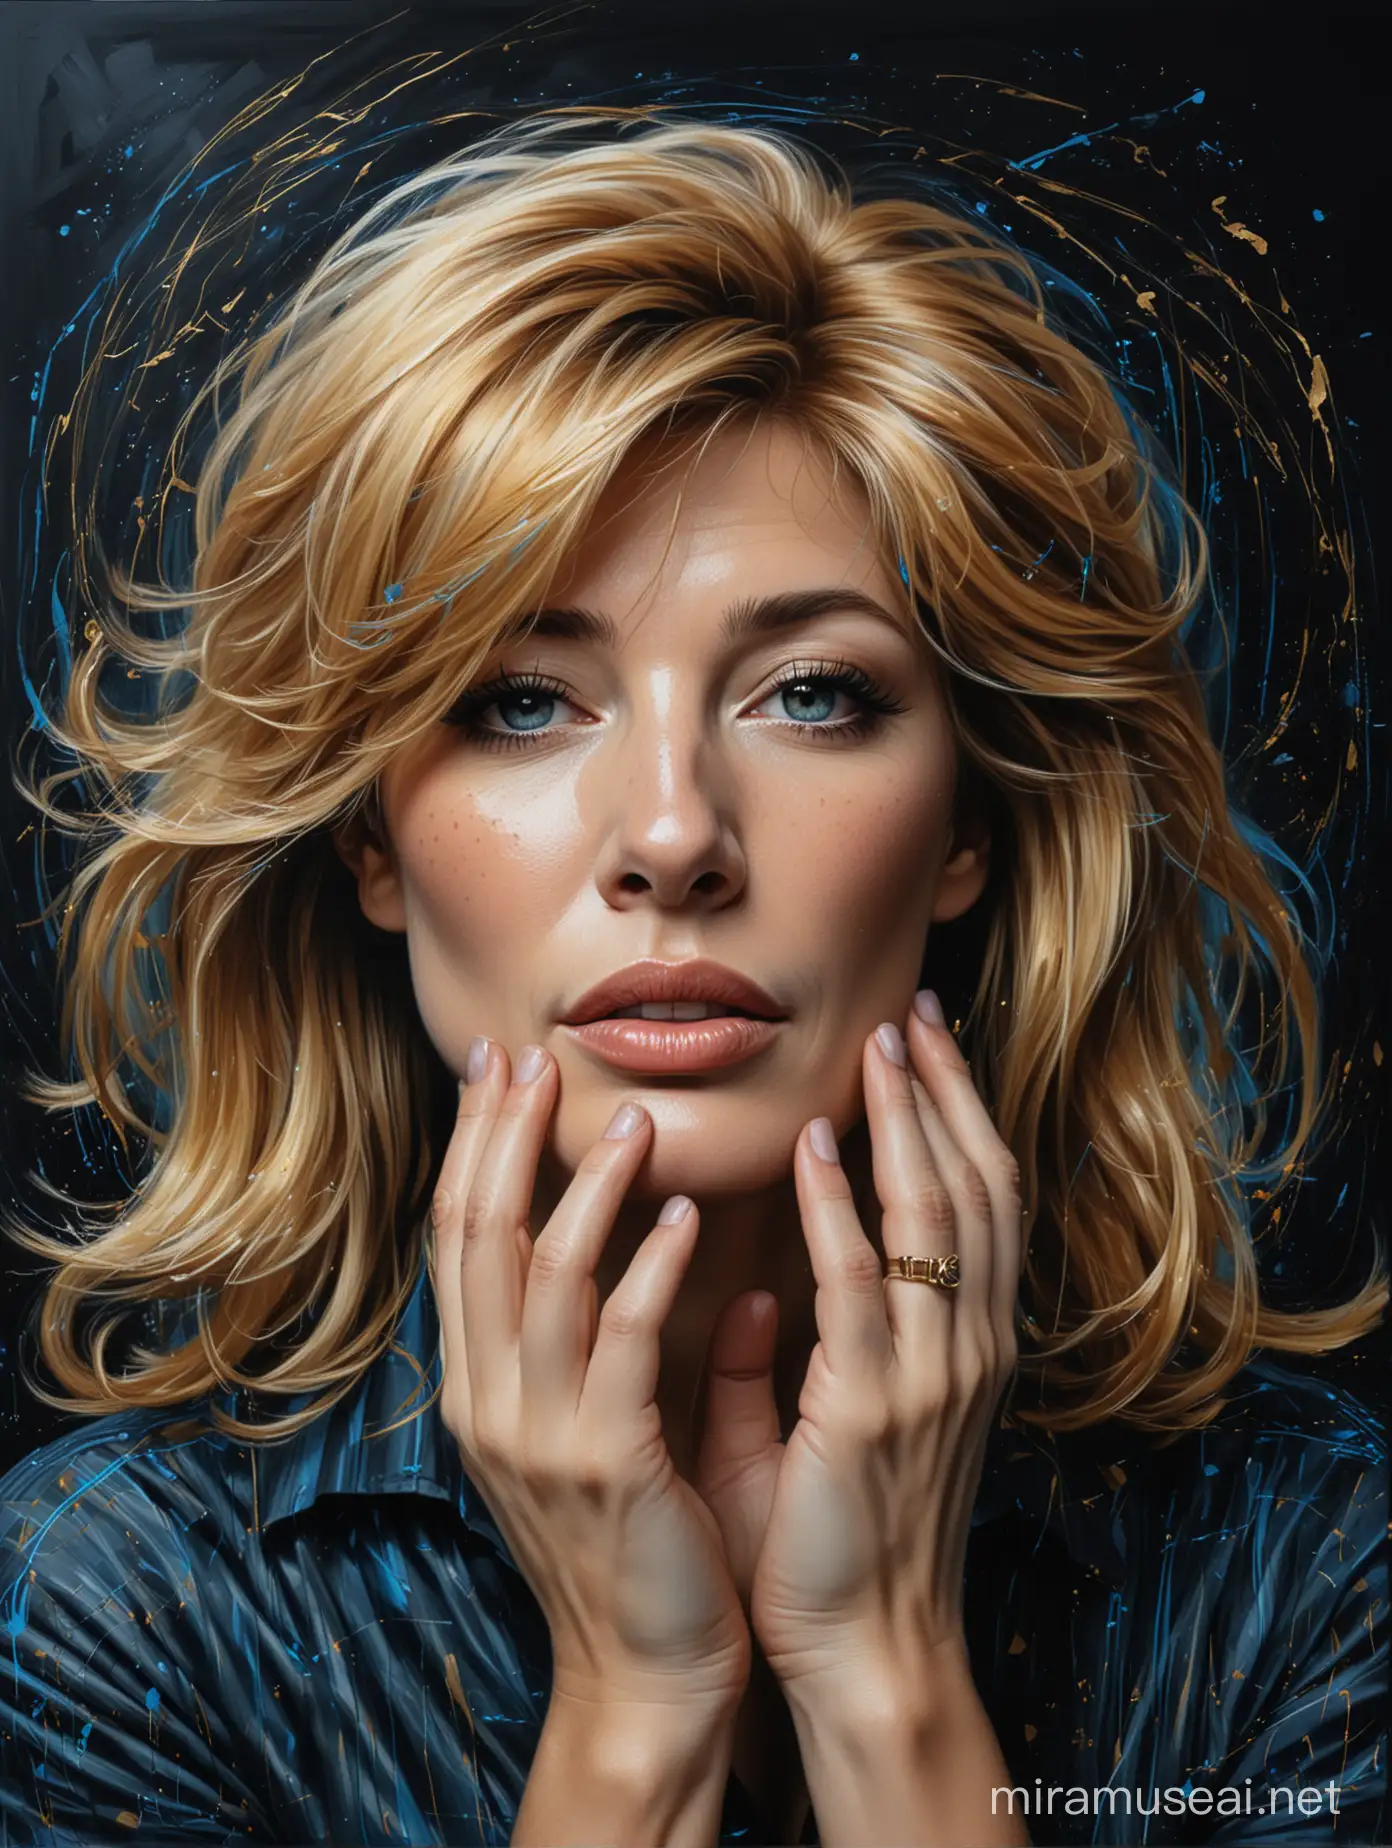 Monica Vitti Portrait Elegance and Contemplation in New Classic Style